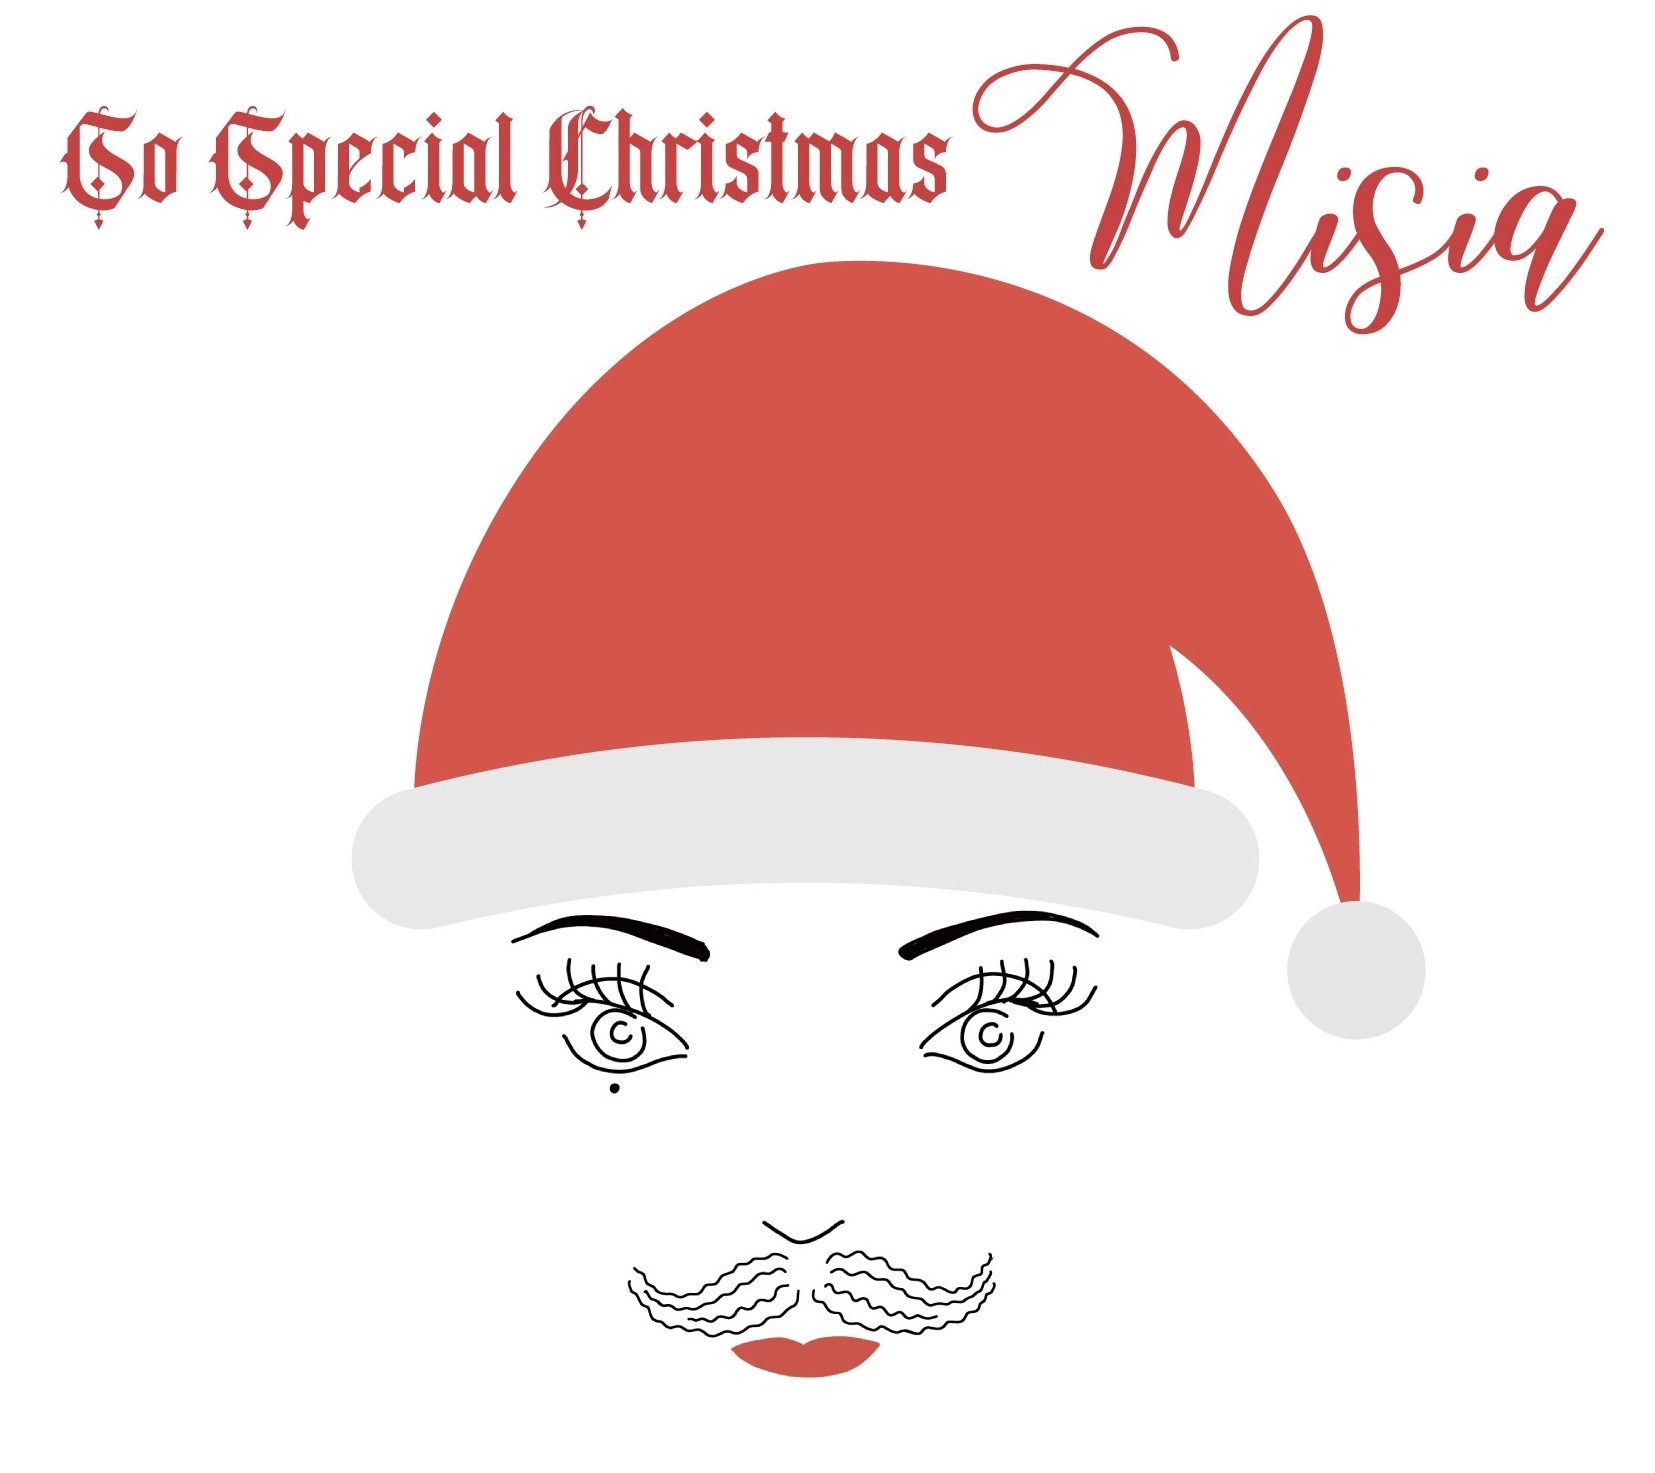 『So Special Christmas』ジャケット